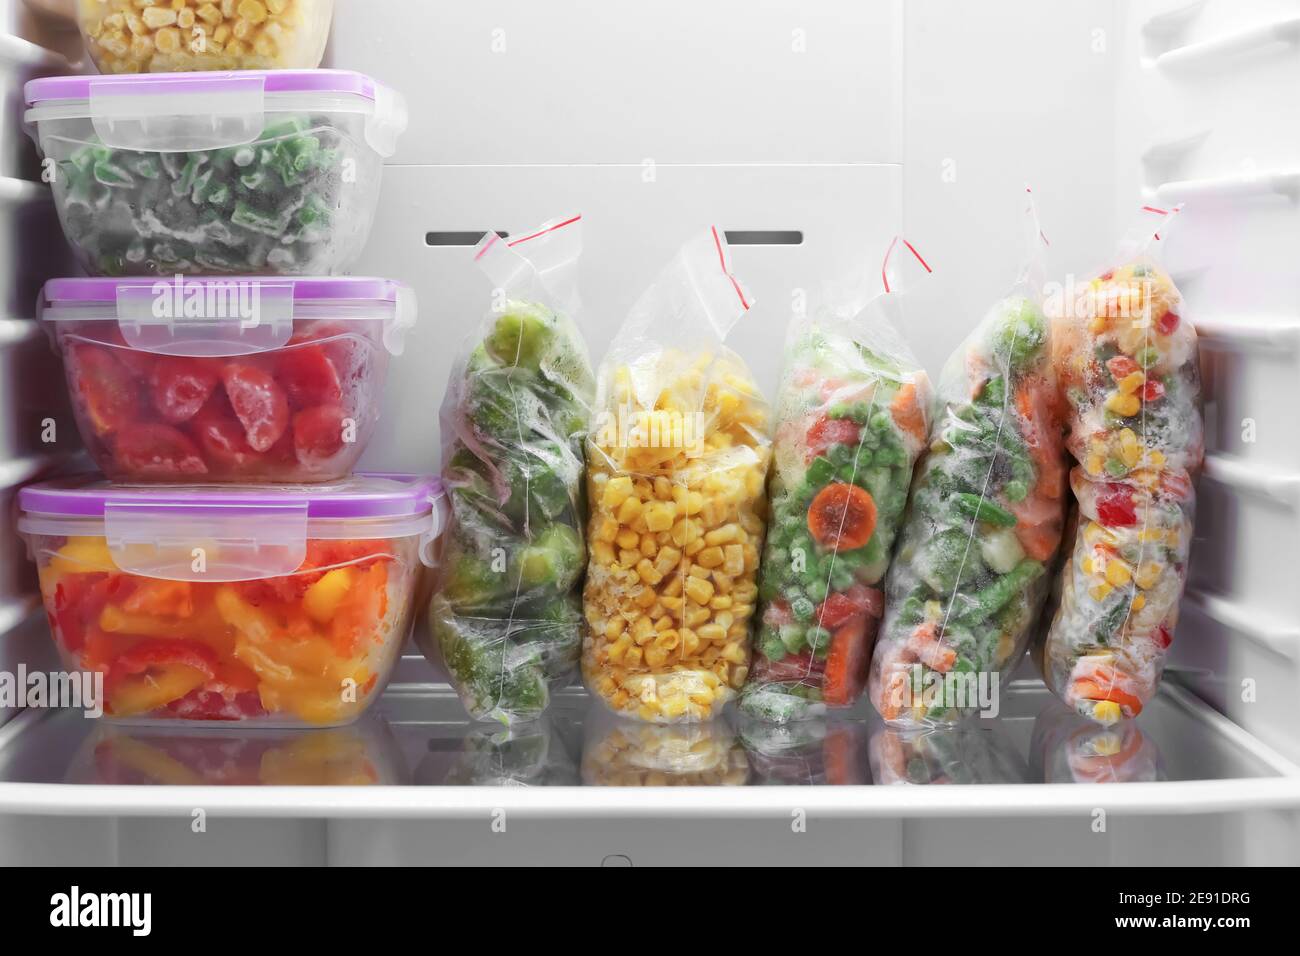 https://c8.alamy.com/comp/2E91DRG/containers-and-plastic-bags-with-frozen-vegetables-in-refrigerator-2E91DRG.jpg